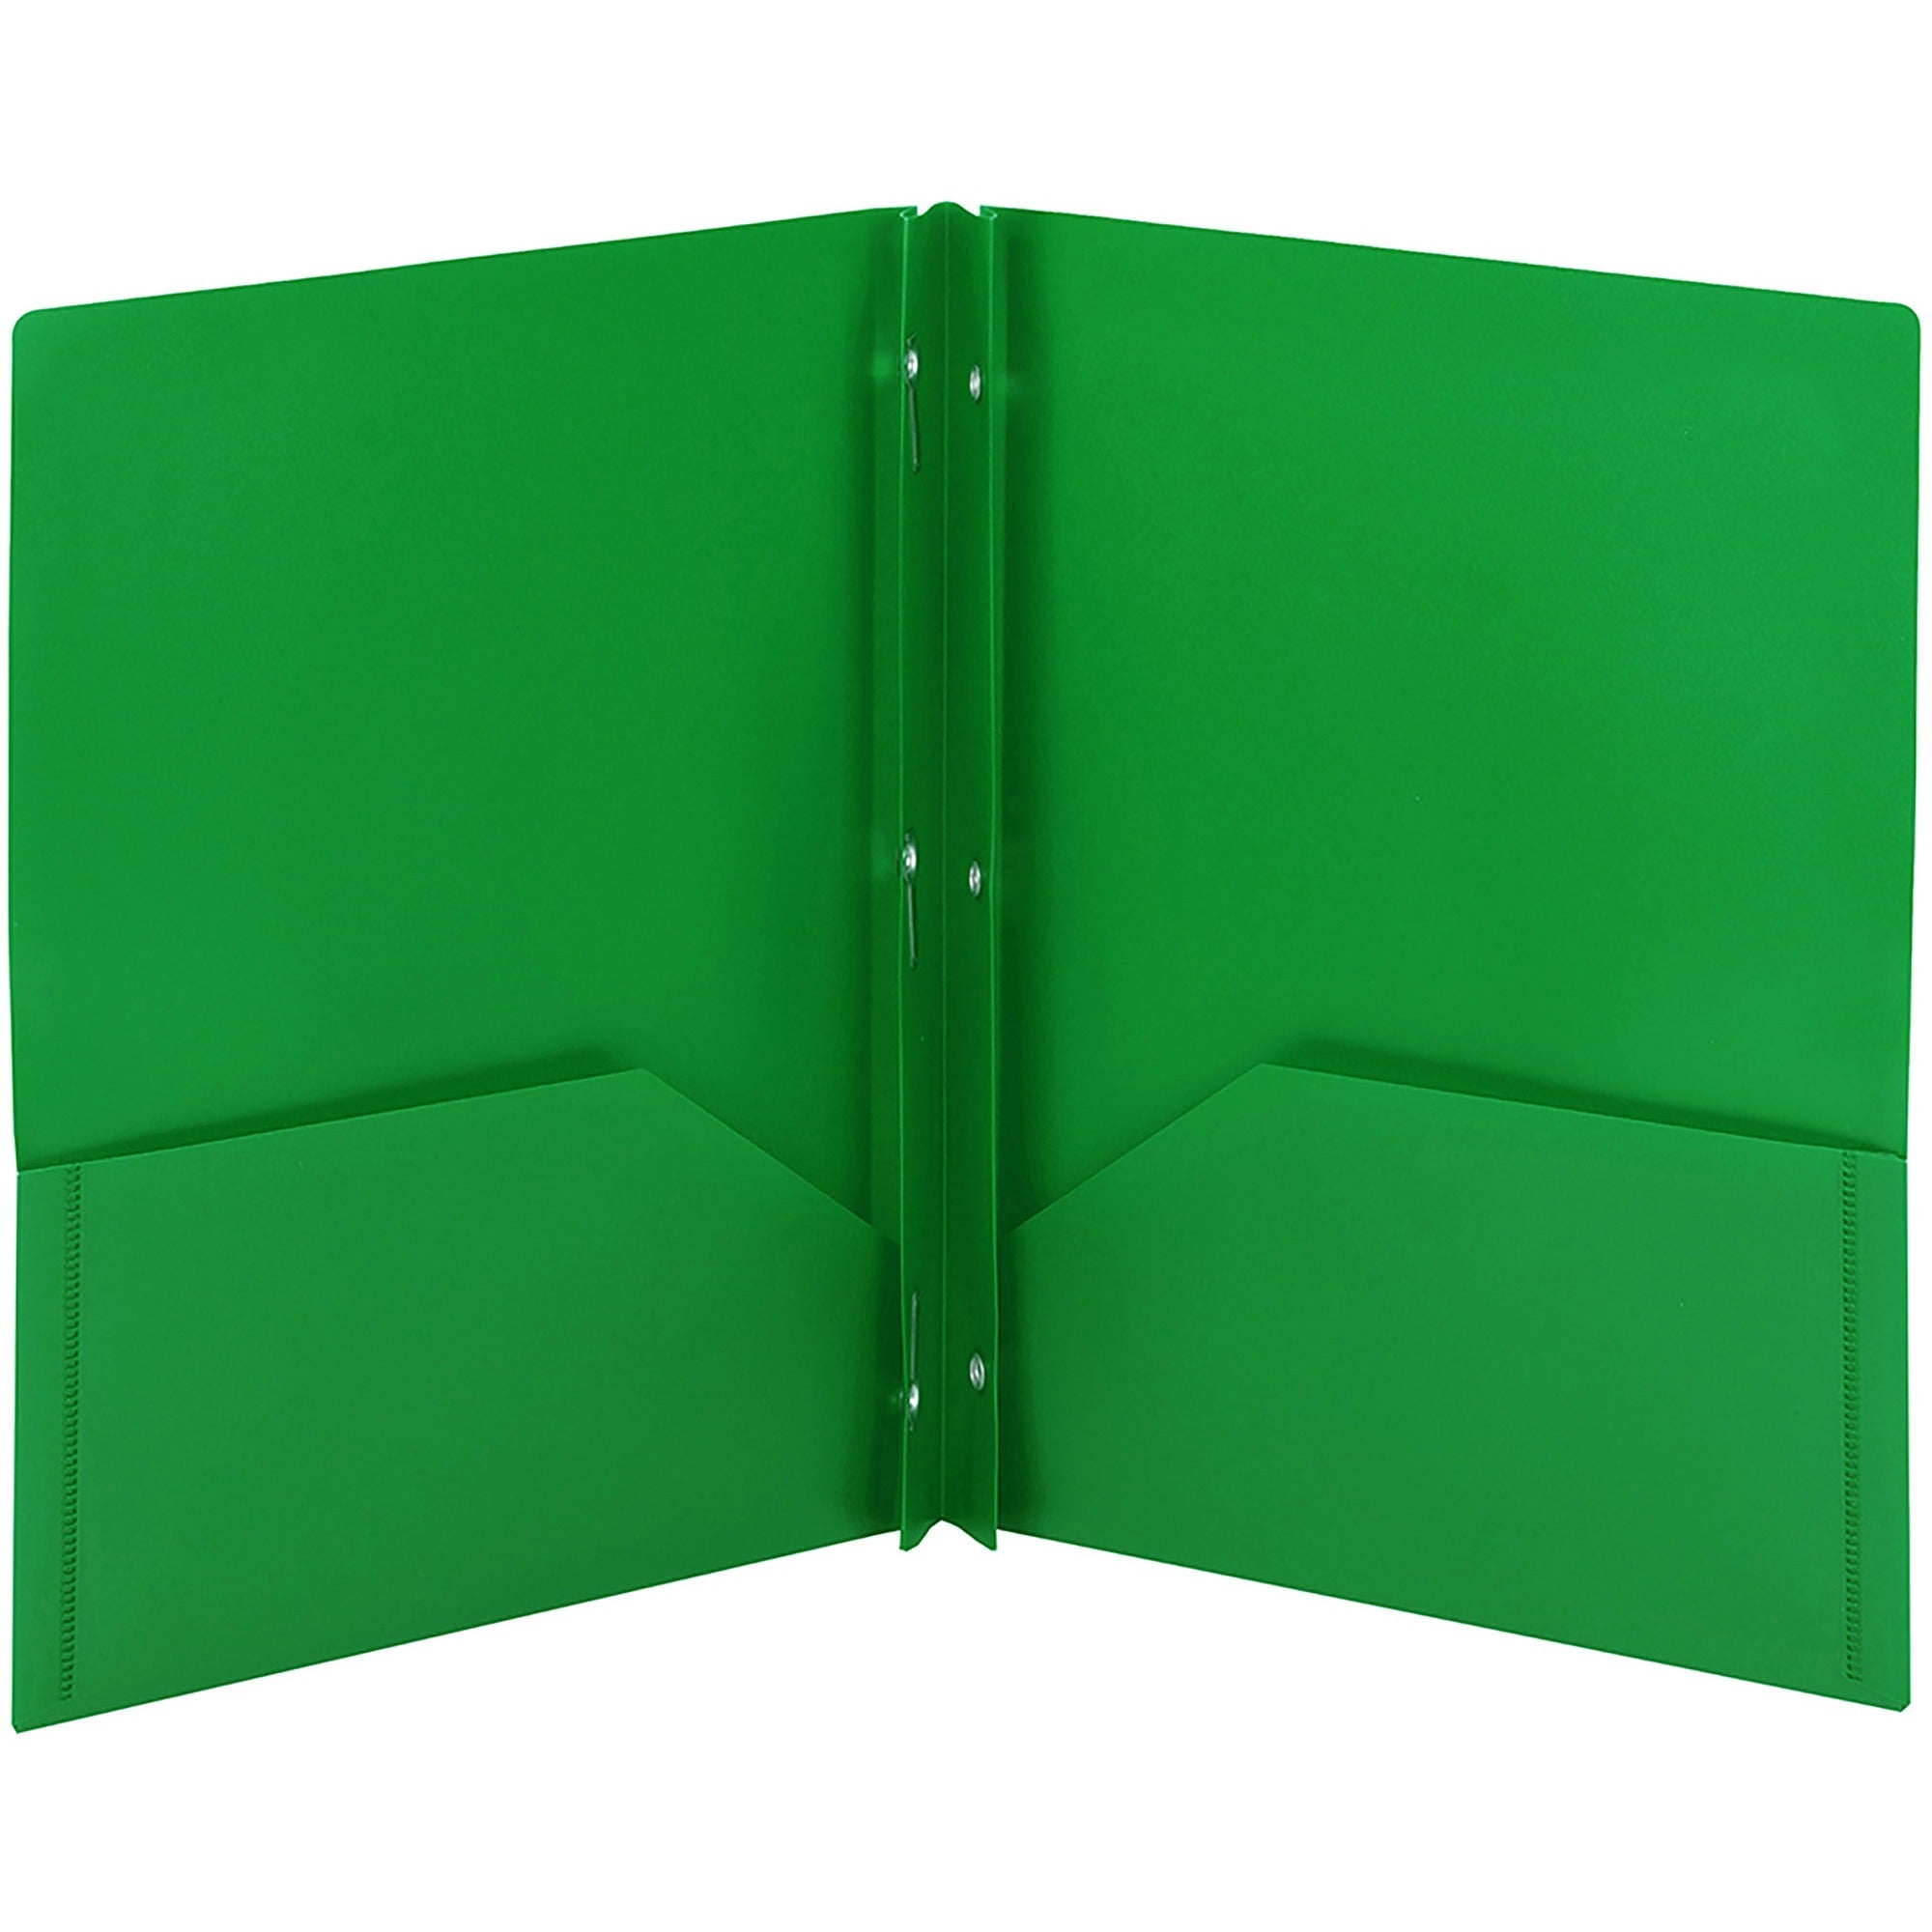 smead-letter-fastener-folder-8-1-2-x-11-180-sheet-capacity-2-x-double-tang-fasteners-2-inside-back-pockets-green-72-carton_smd87732 - 1